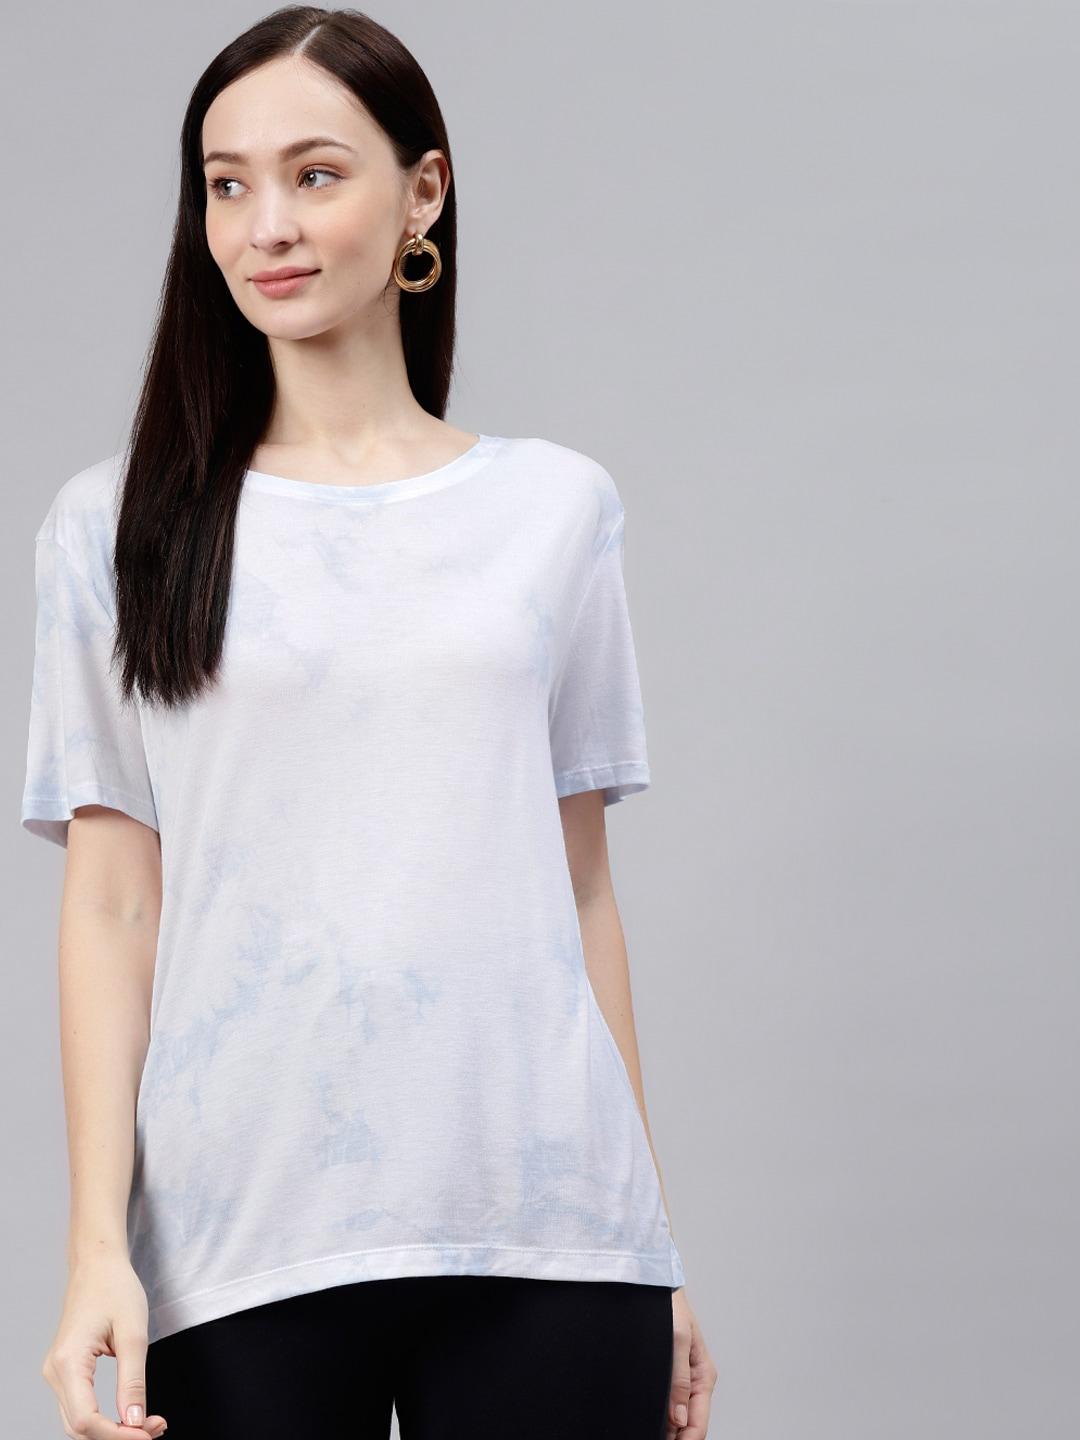 marks-&-spencer-women-blue-tie-and-dye-dyed-t-shirt